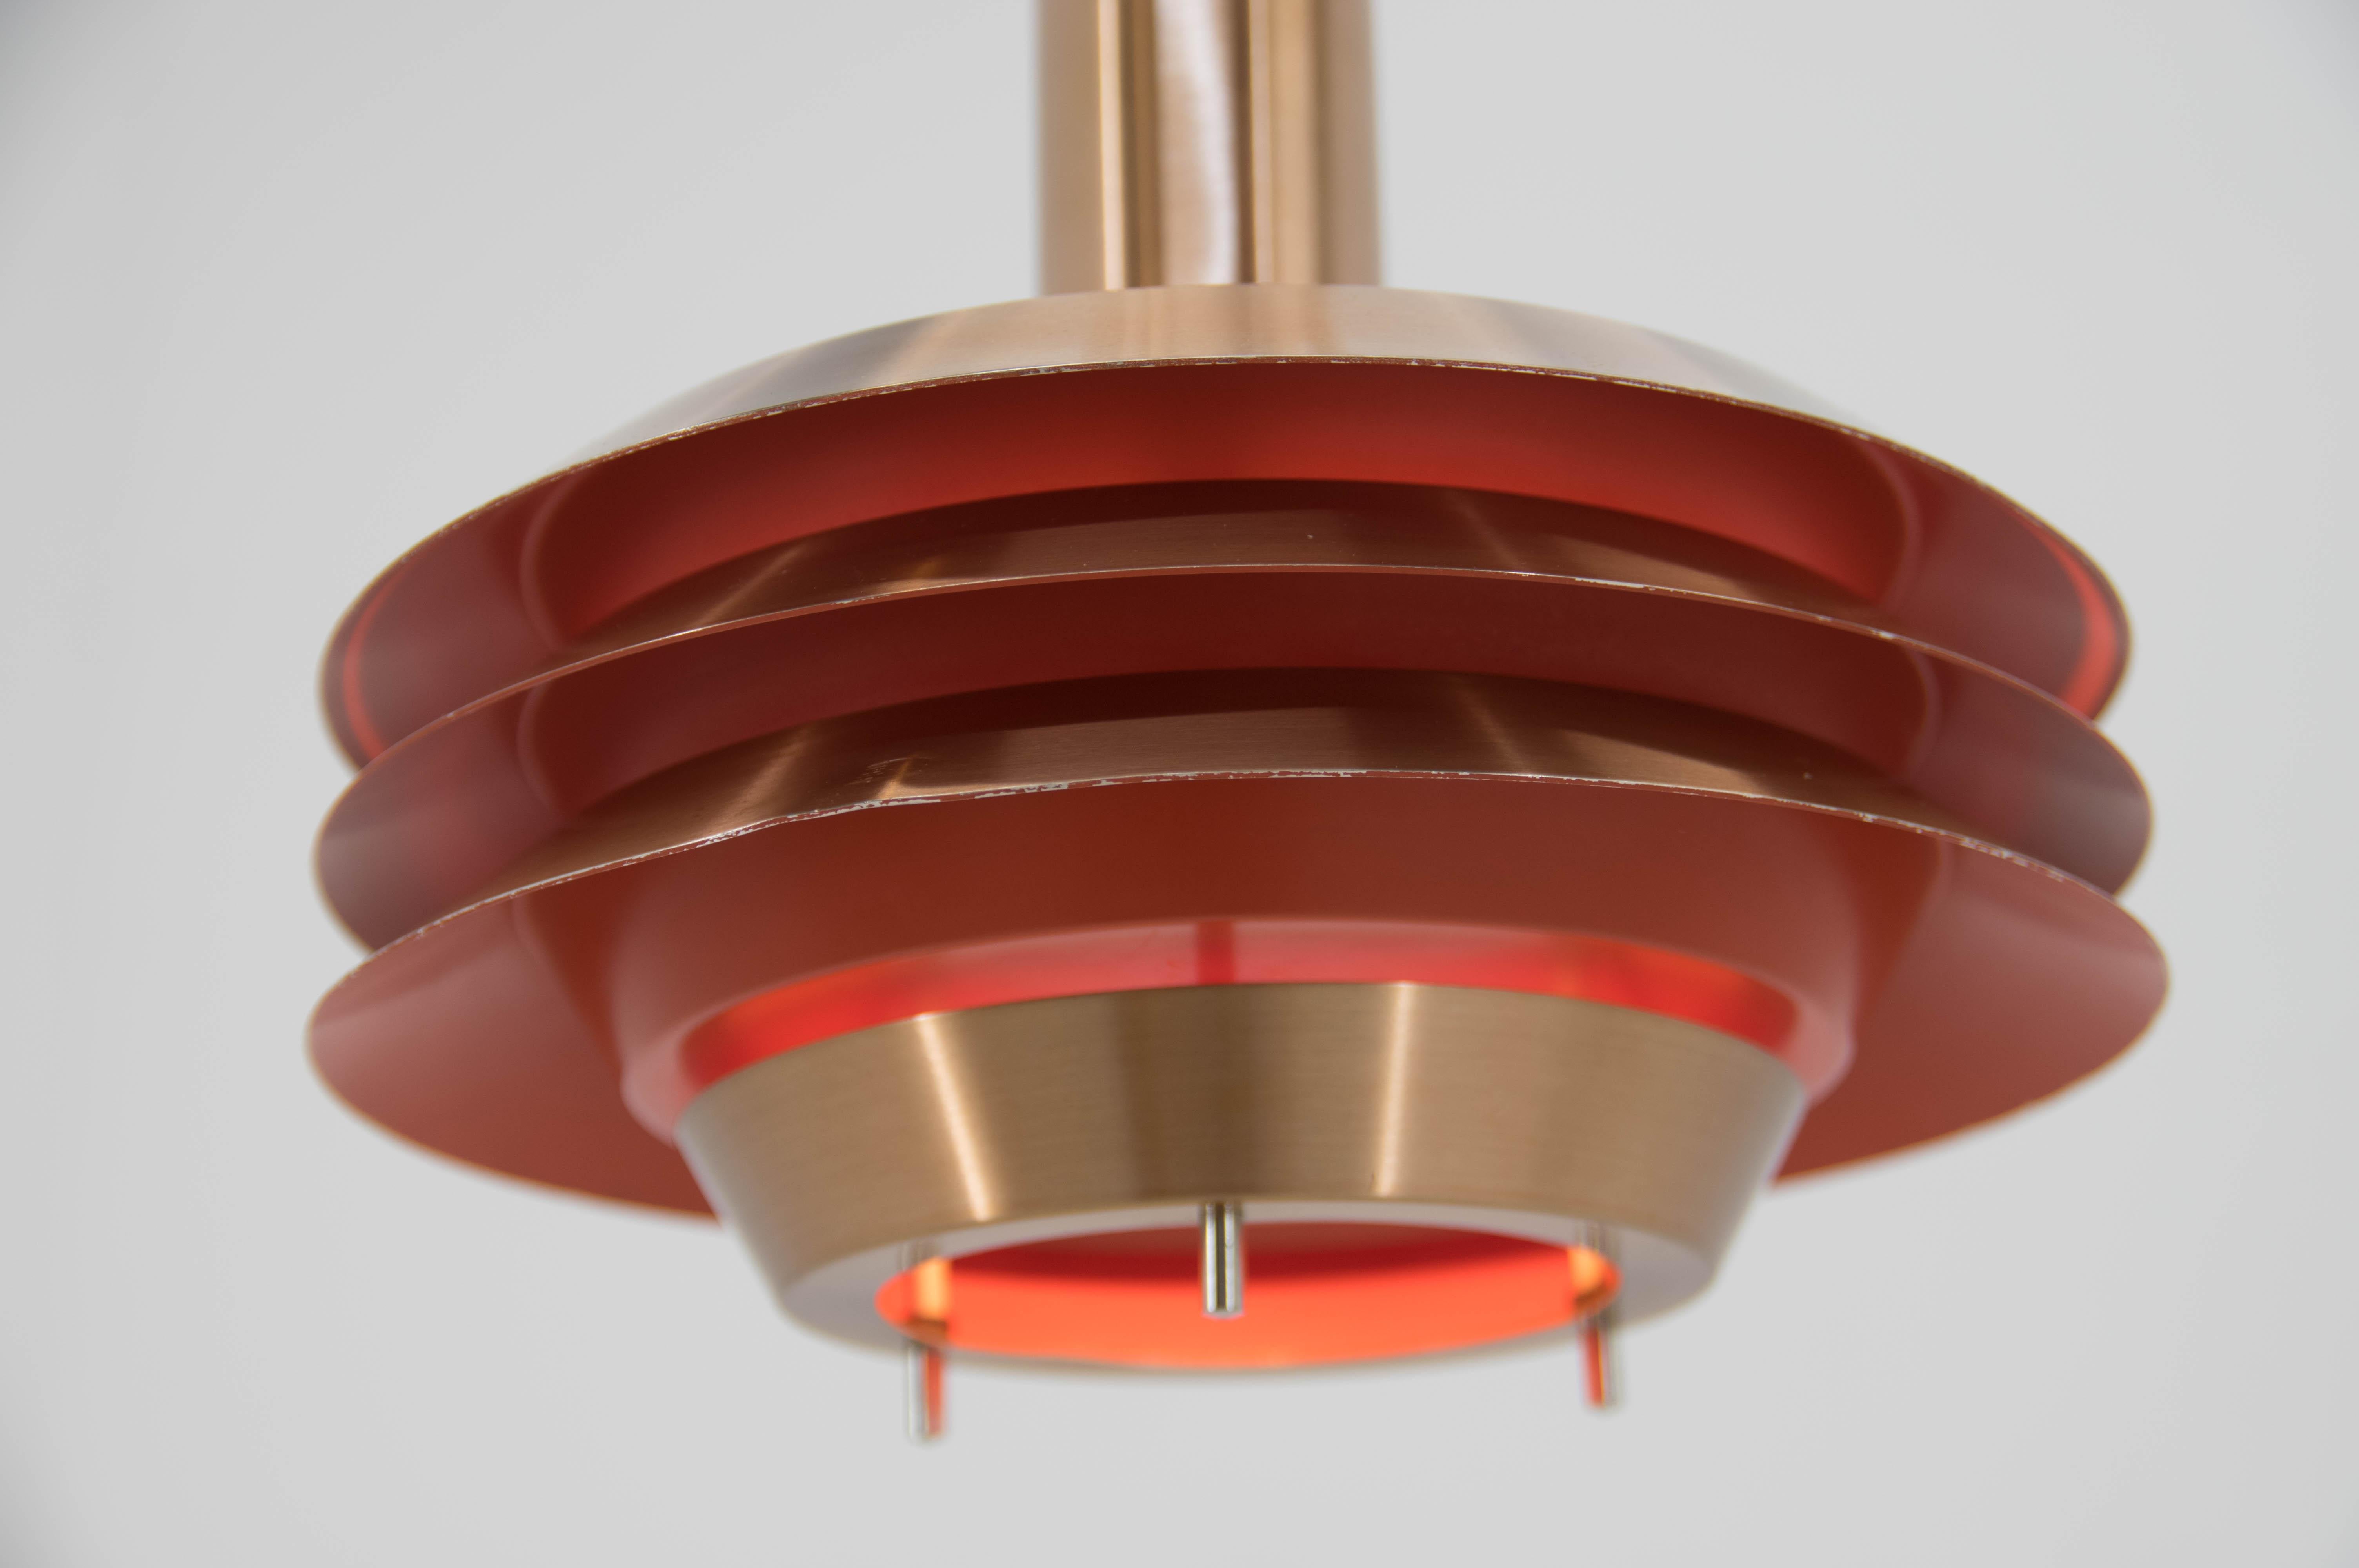 Scandinavian pendant in red and brass color.
1x75W E25-E27 bulb
US wiring compatible
max height 160cm.